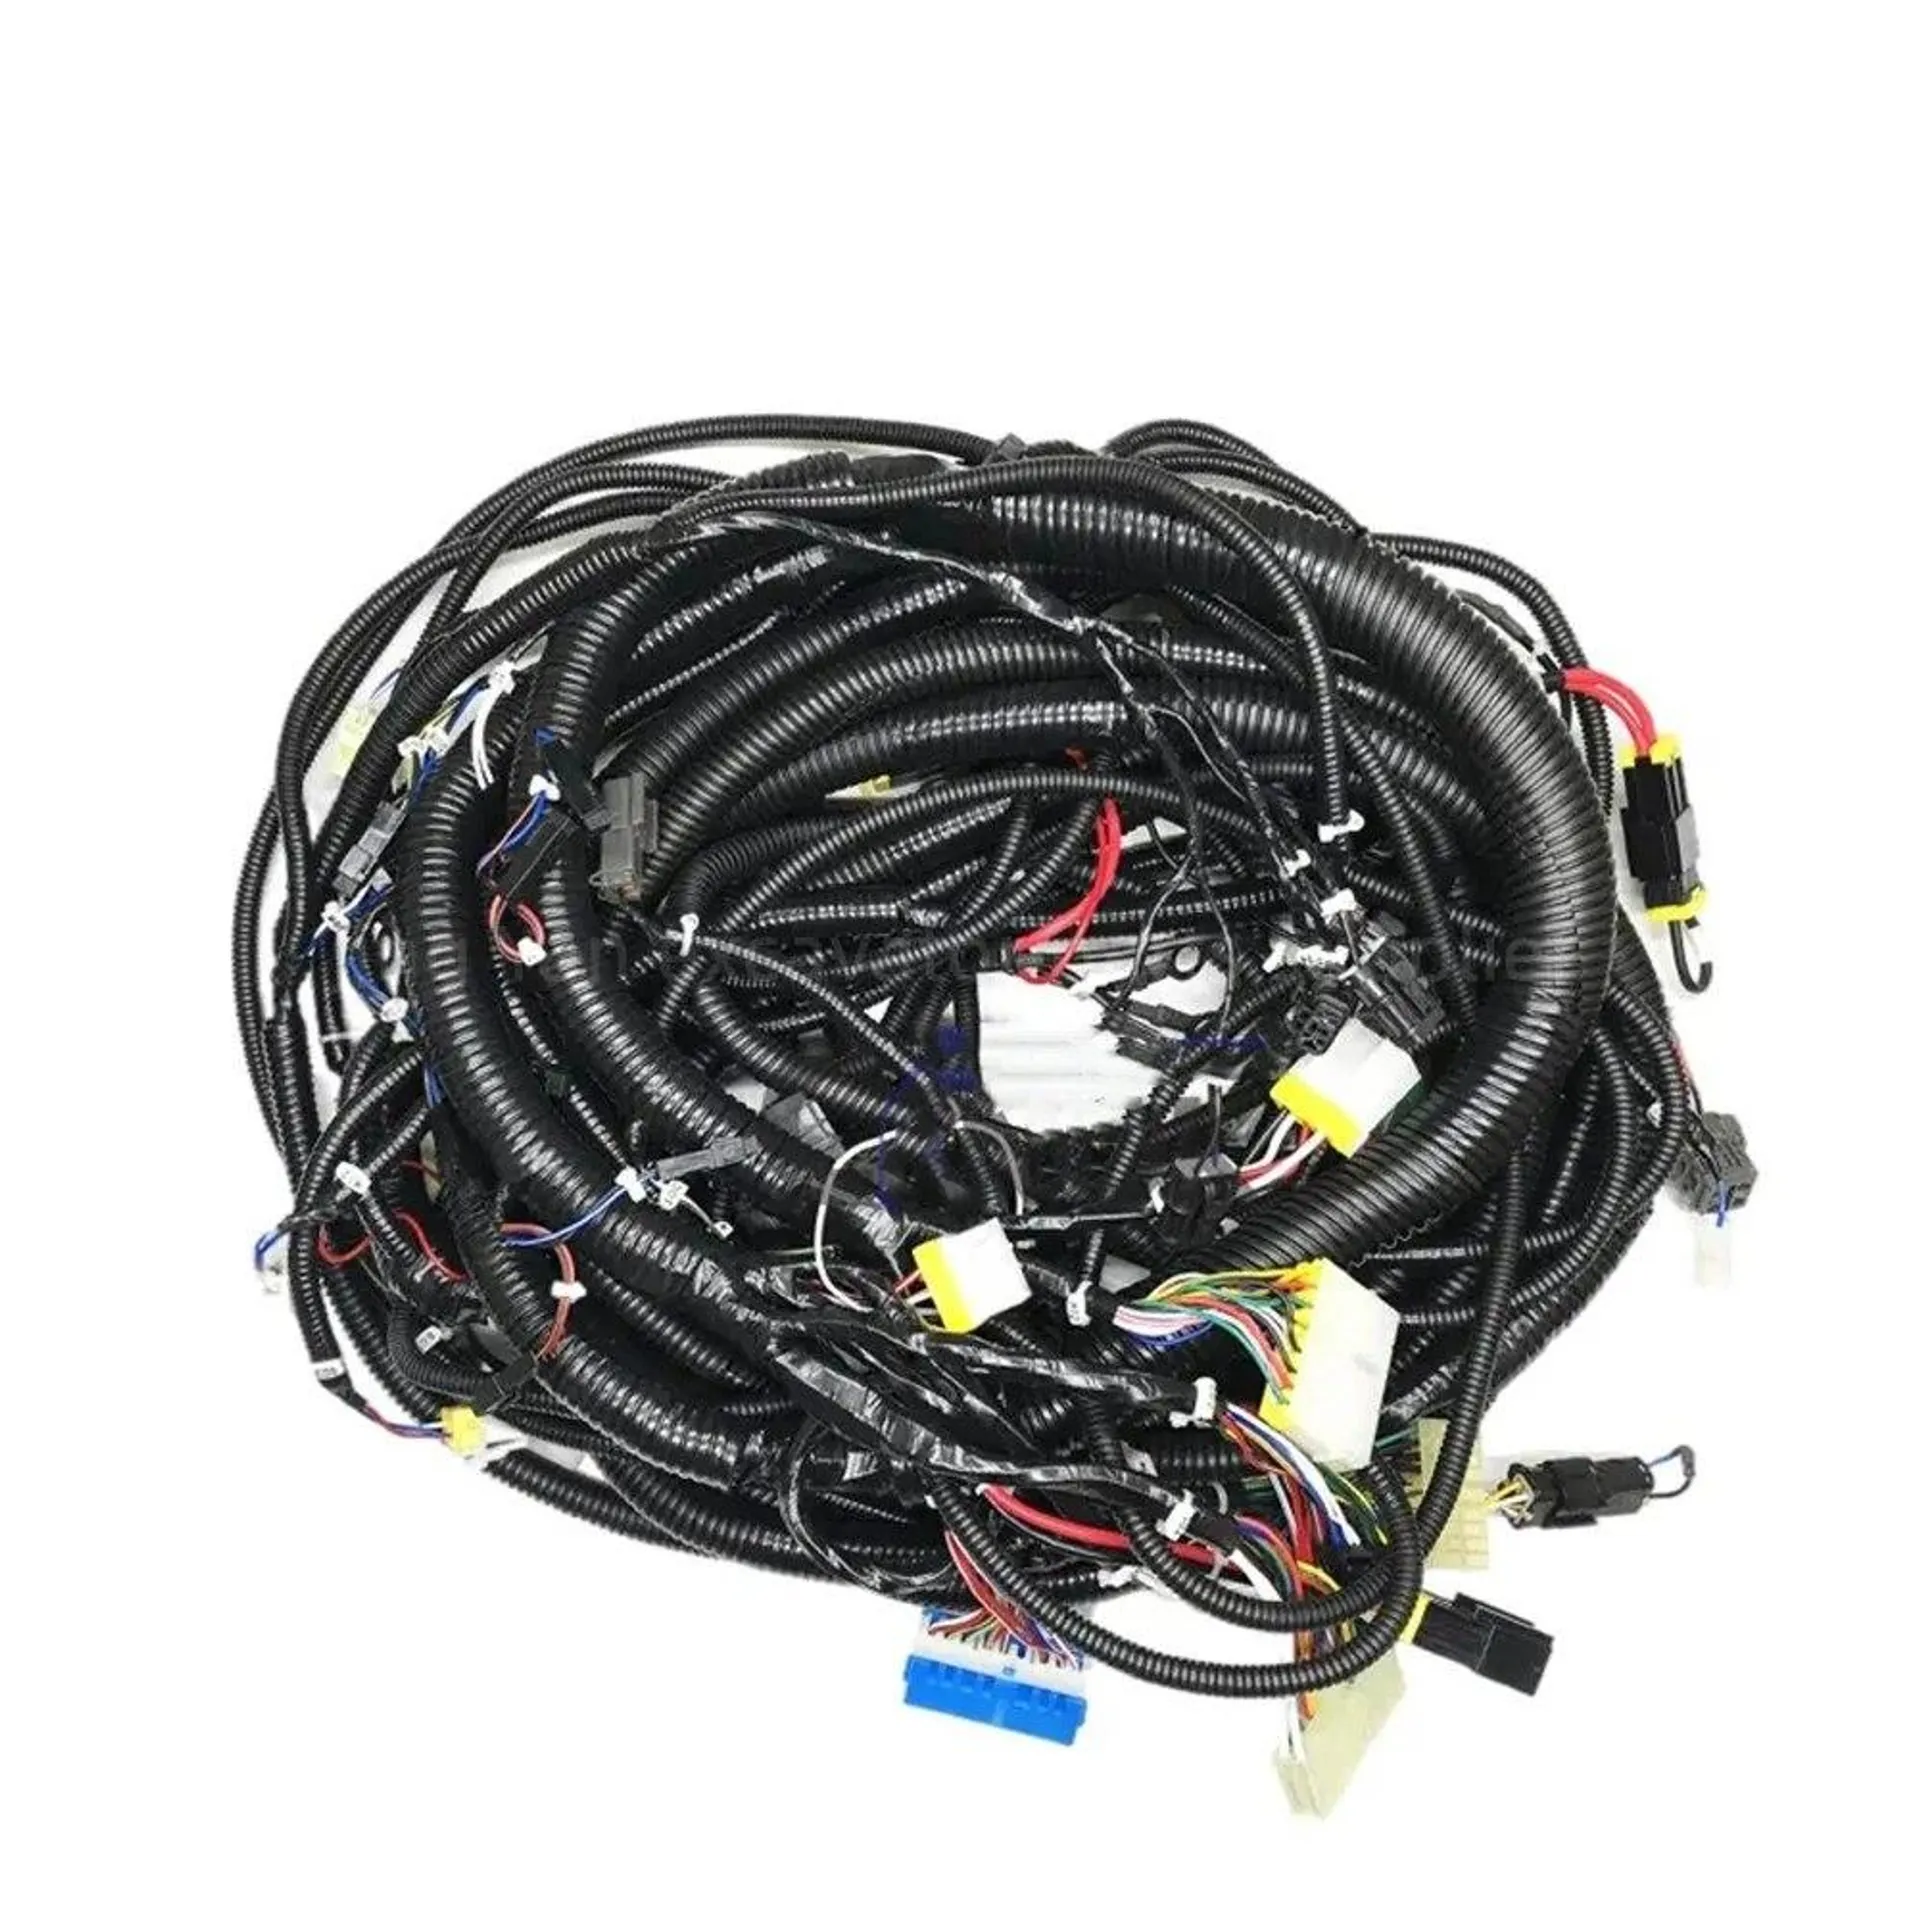 Excavator Parts Cab Wire Harness 20Y-06-24811 For Komatsu PC200-6 6D102 External Main Wiring Harness 20Y0624811 Spare